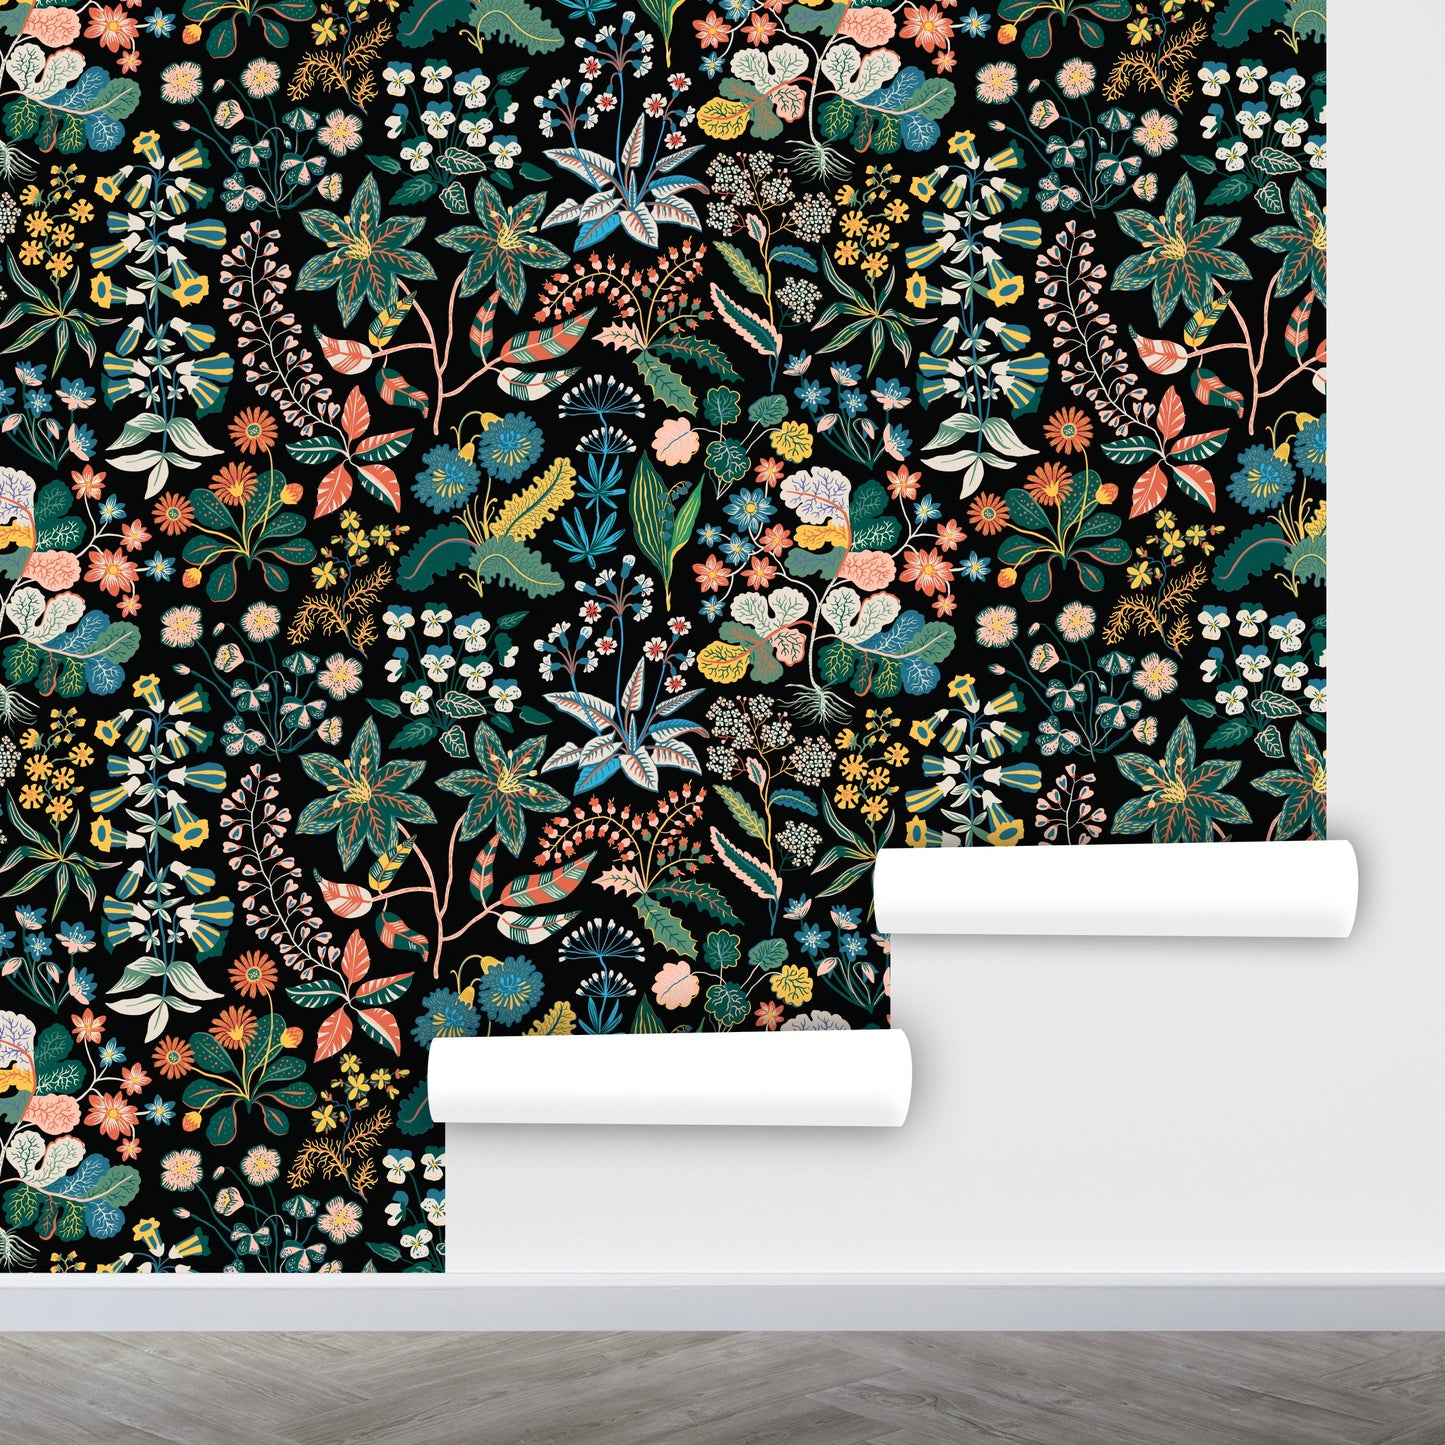 Botanical Wallpaper Peel and Stick, Wildflower Wallpaper, Dark Floral Wallpaper, Herbs Wallpaper, Removable Wall Paper